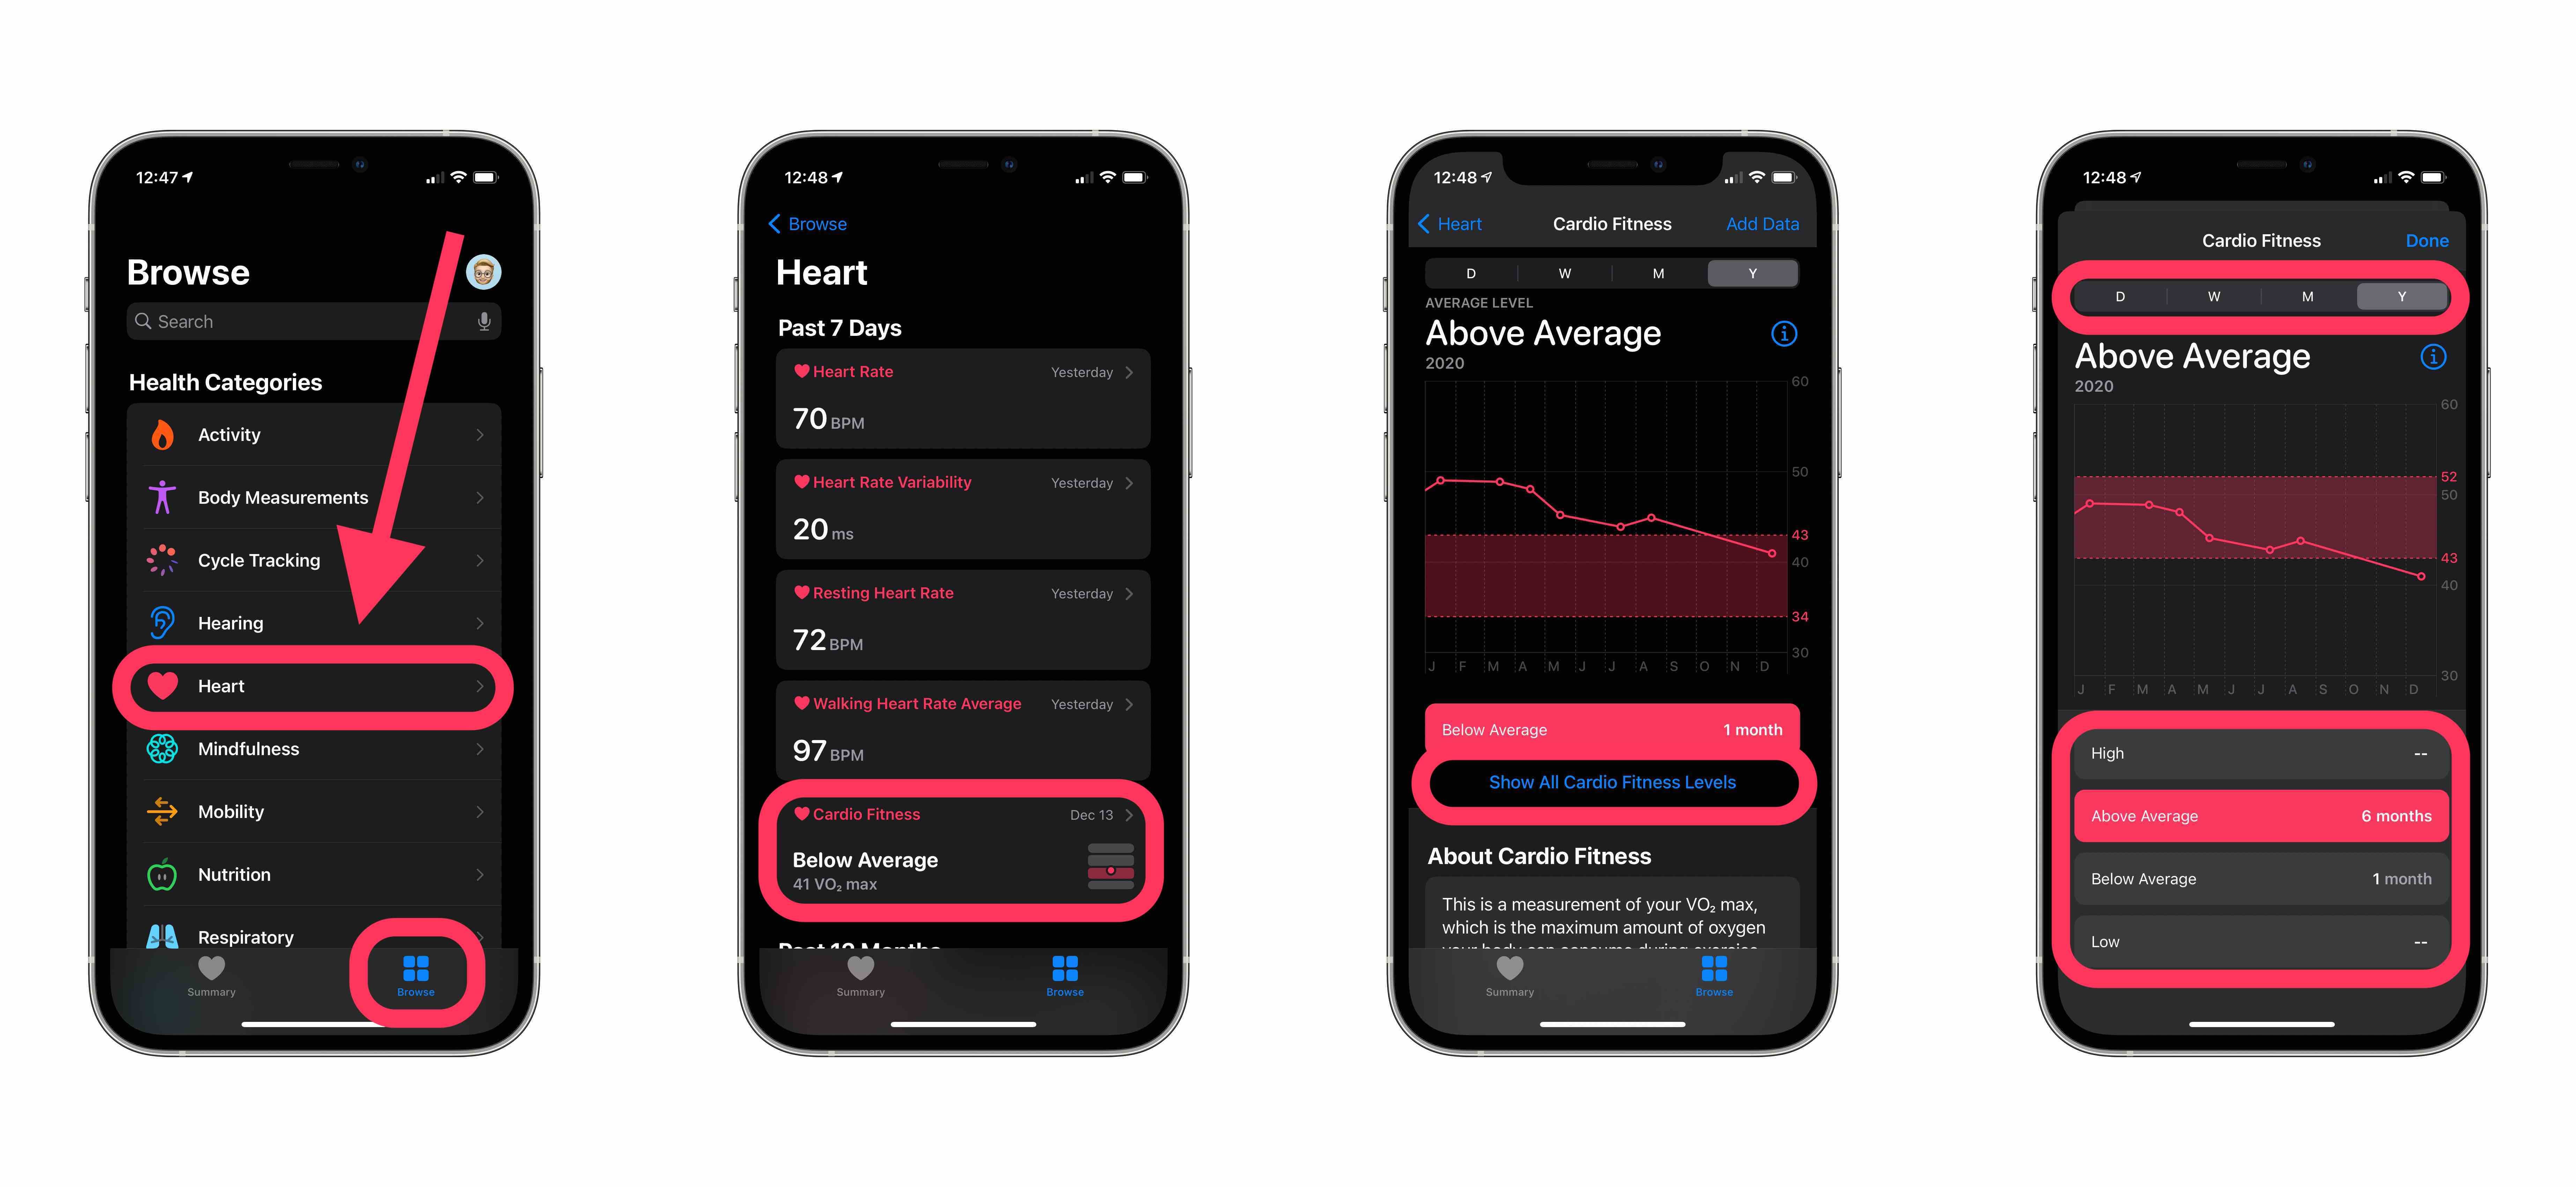 Apple Watch Rehearsal on How to Use Cardio Fitness on iPhone